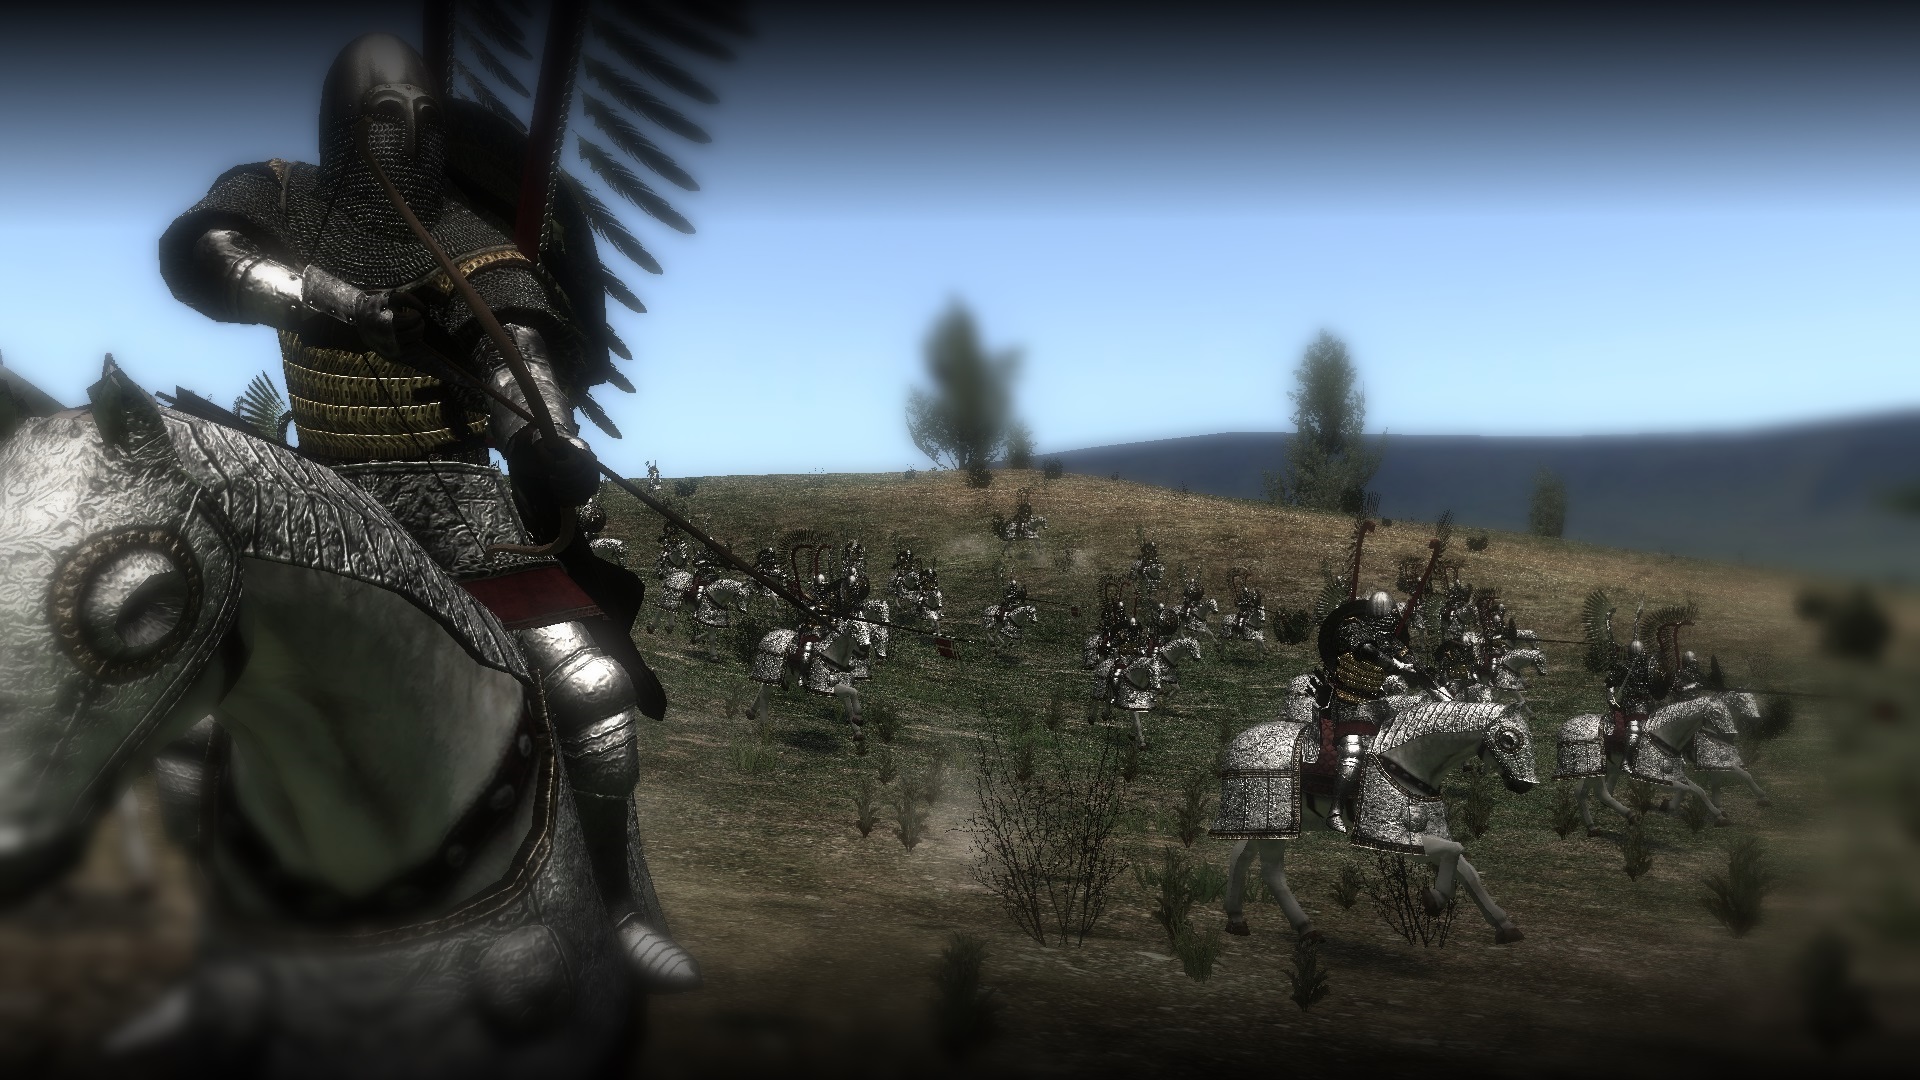 Warband лорды. Mount and Blade Warband темные Рыцари. Маунт энд блейд 1429. Триполийский Рыцари Маунт блейд. Mount and Blade Warband черные Рыцари.